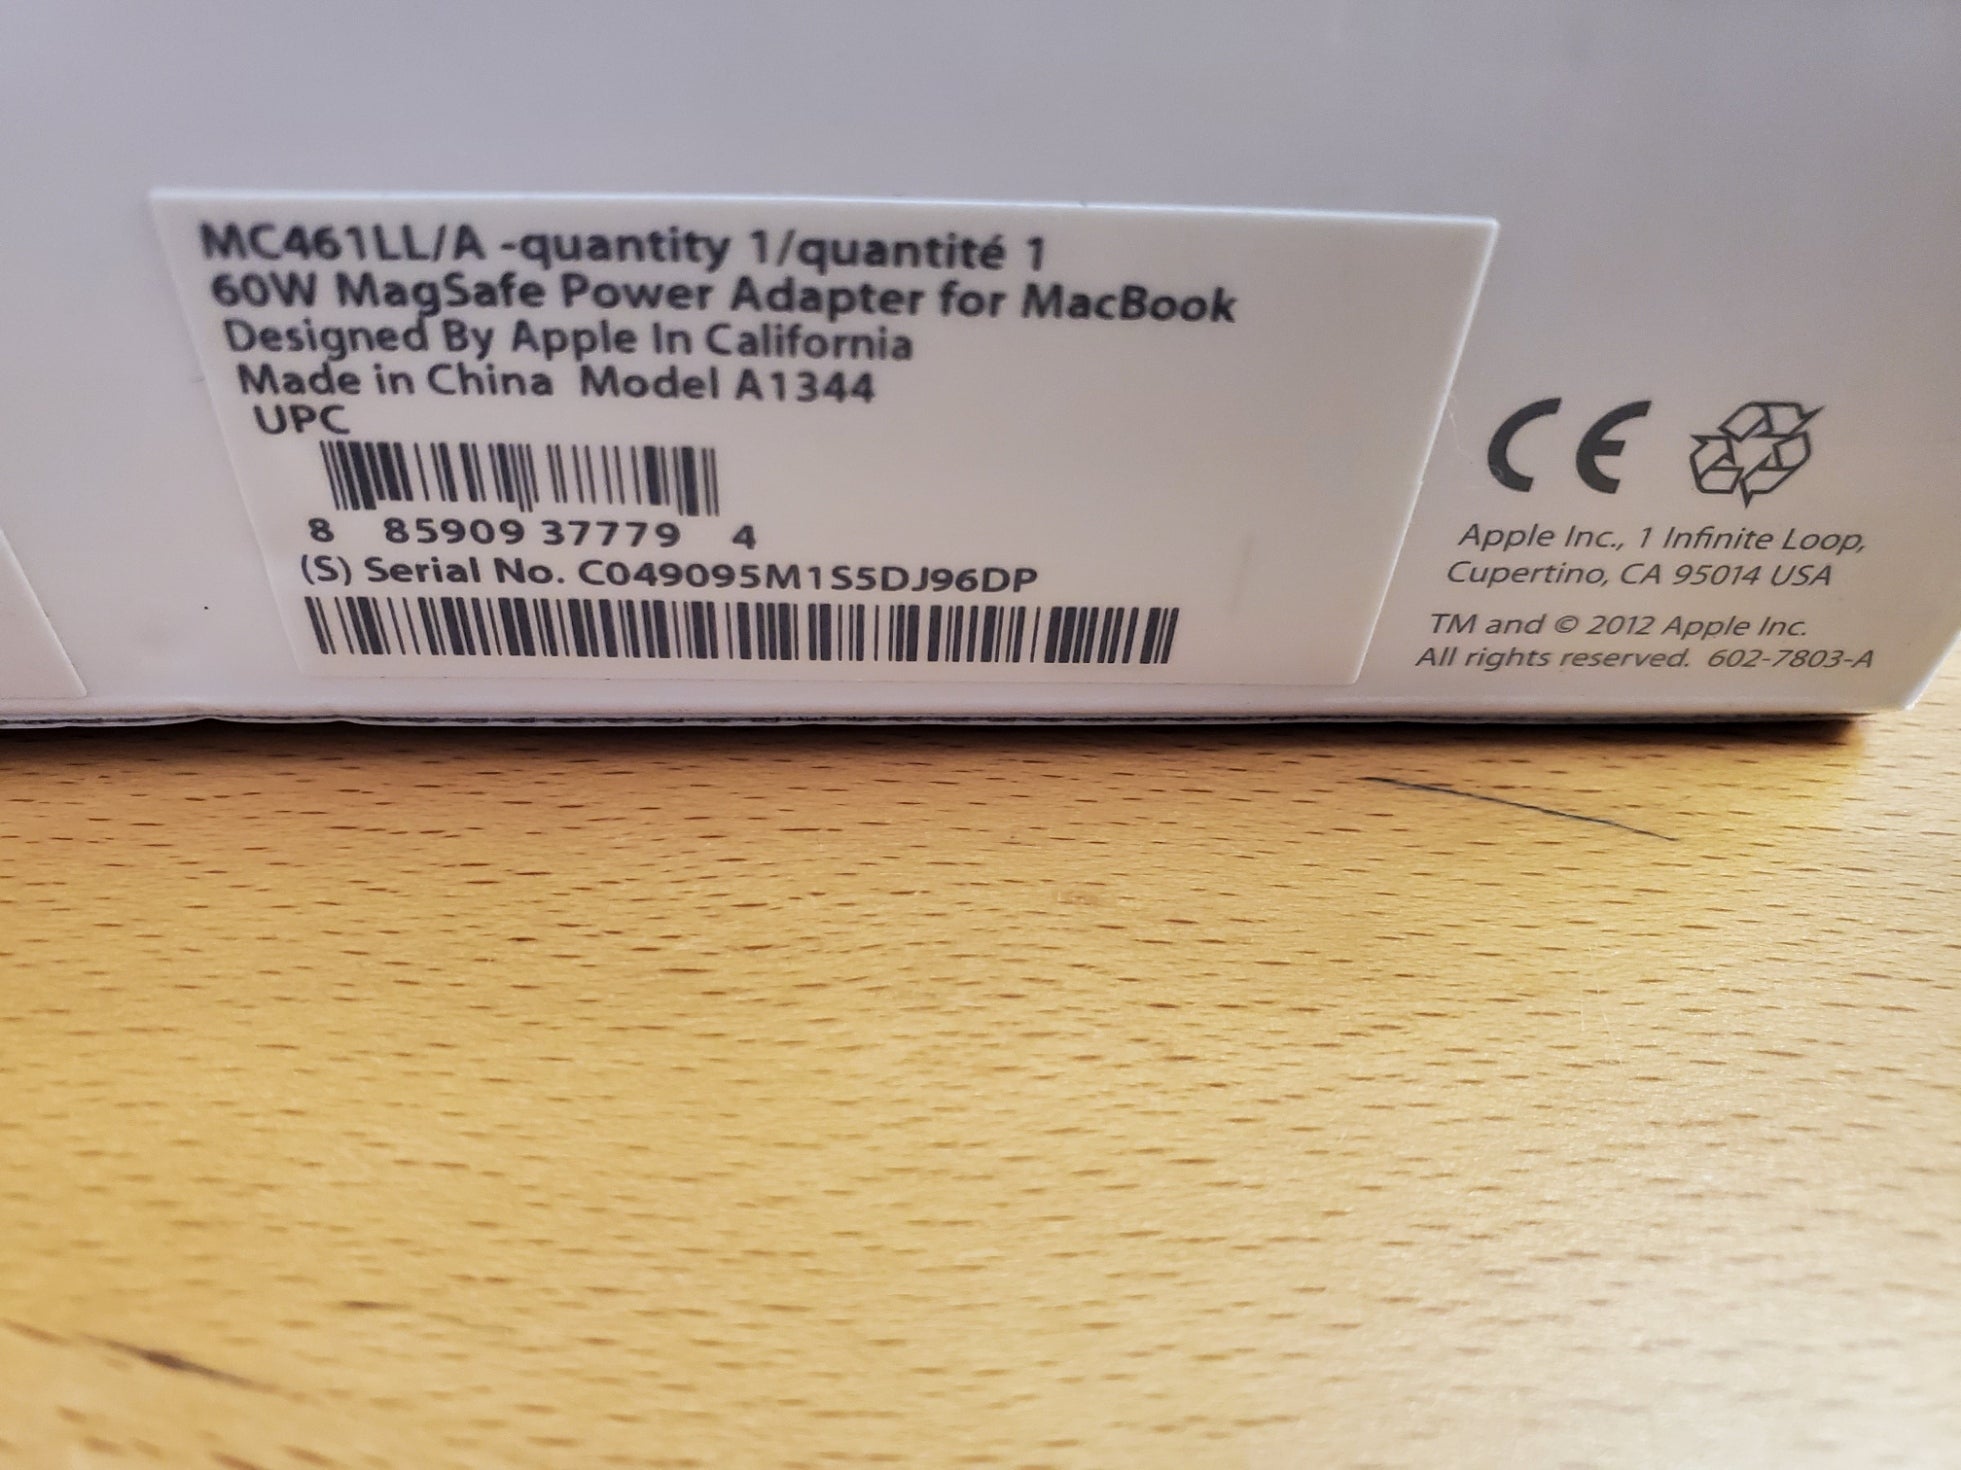 Apple MacBook Pro 60W MagSafe Charger MC461LL/A